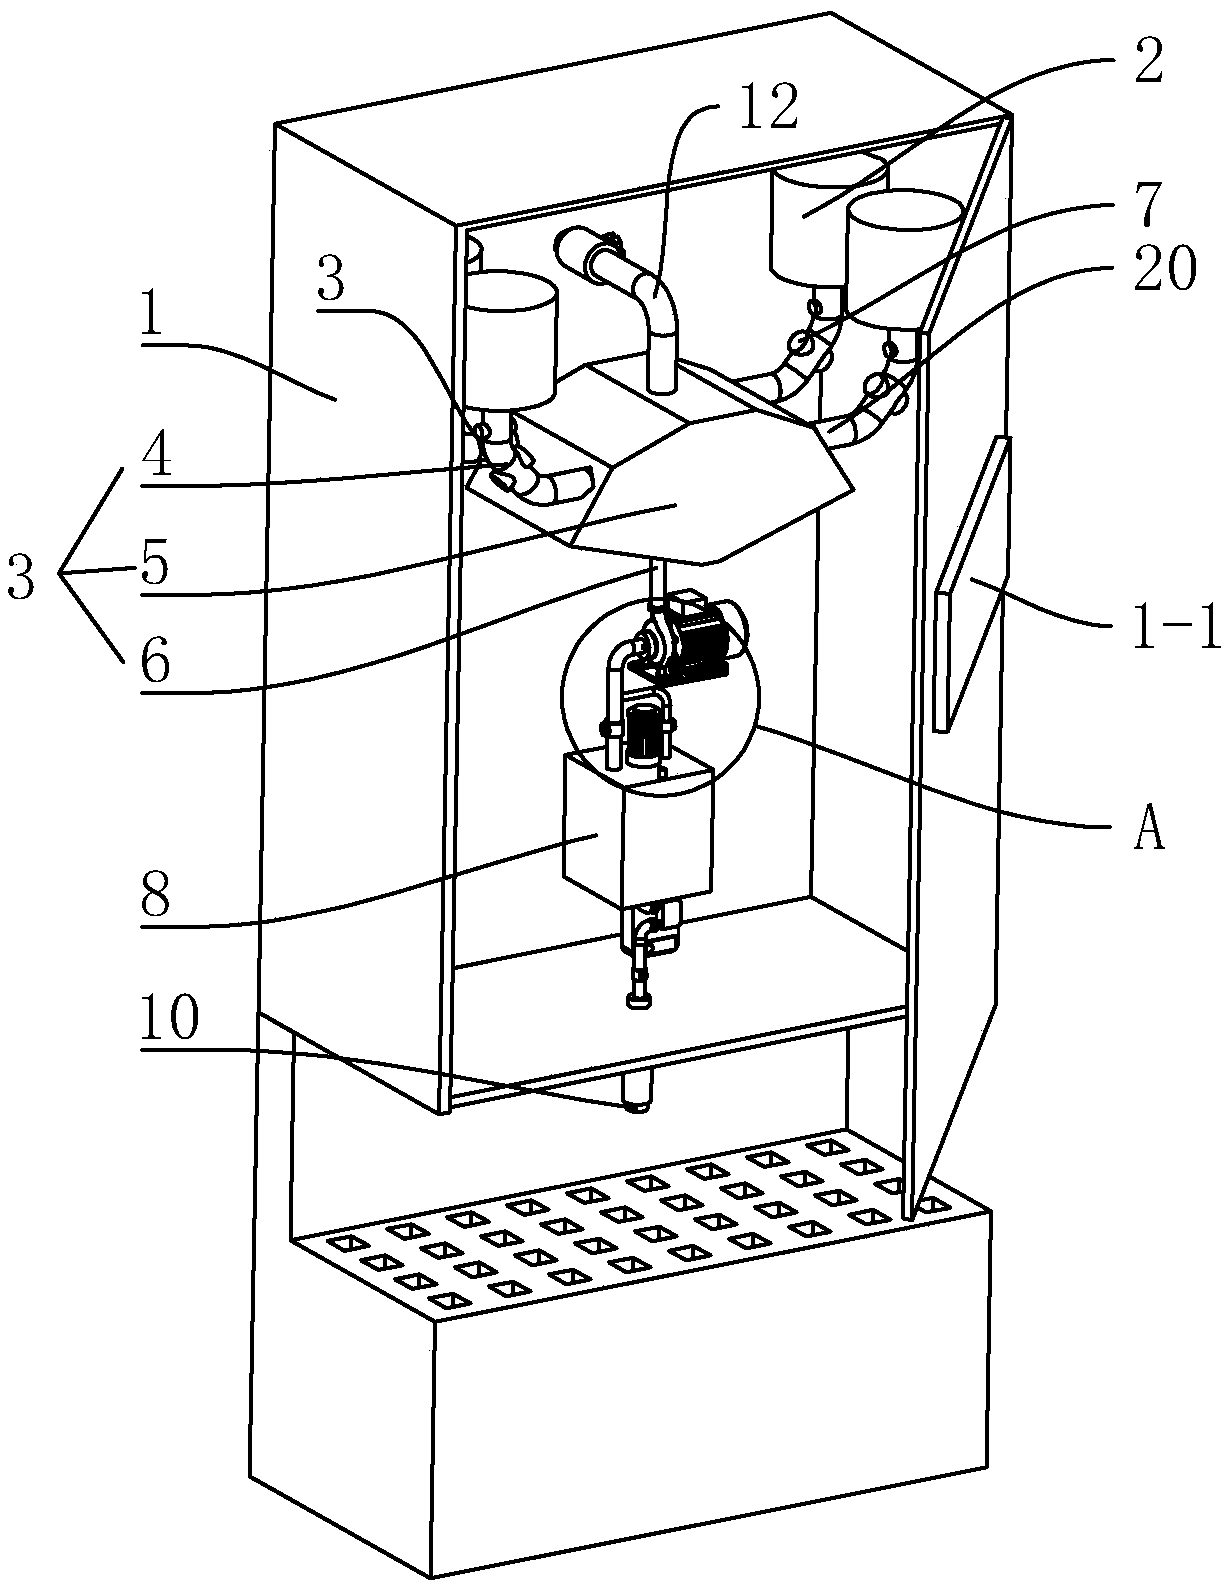 Equipment for automatically mixing liquid drink freshly and mixing method